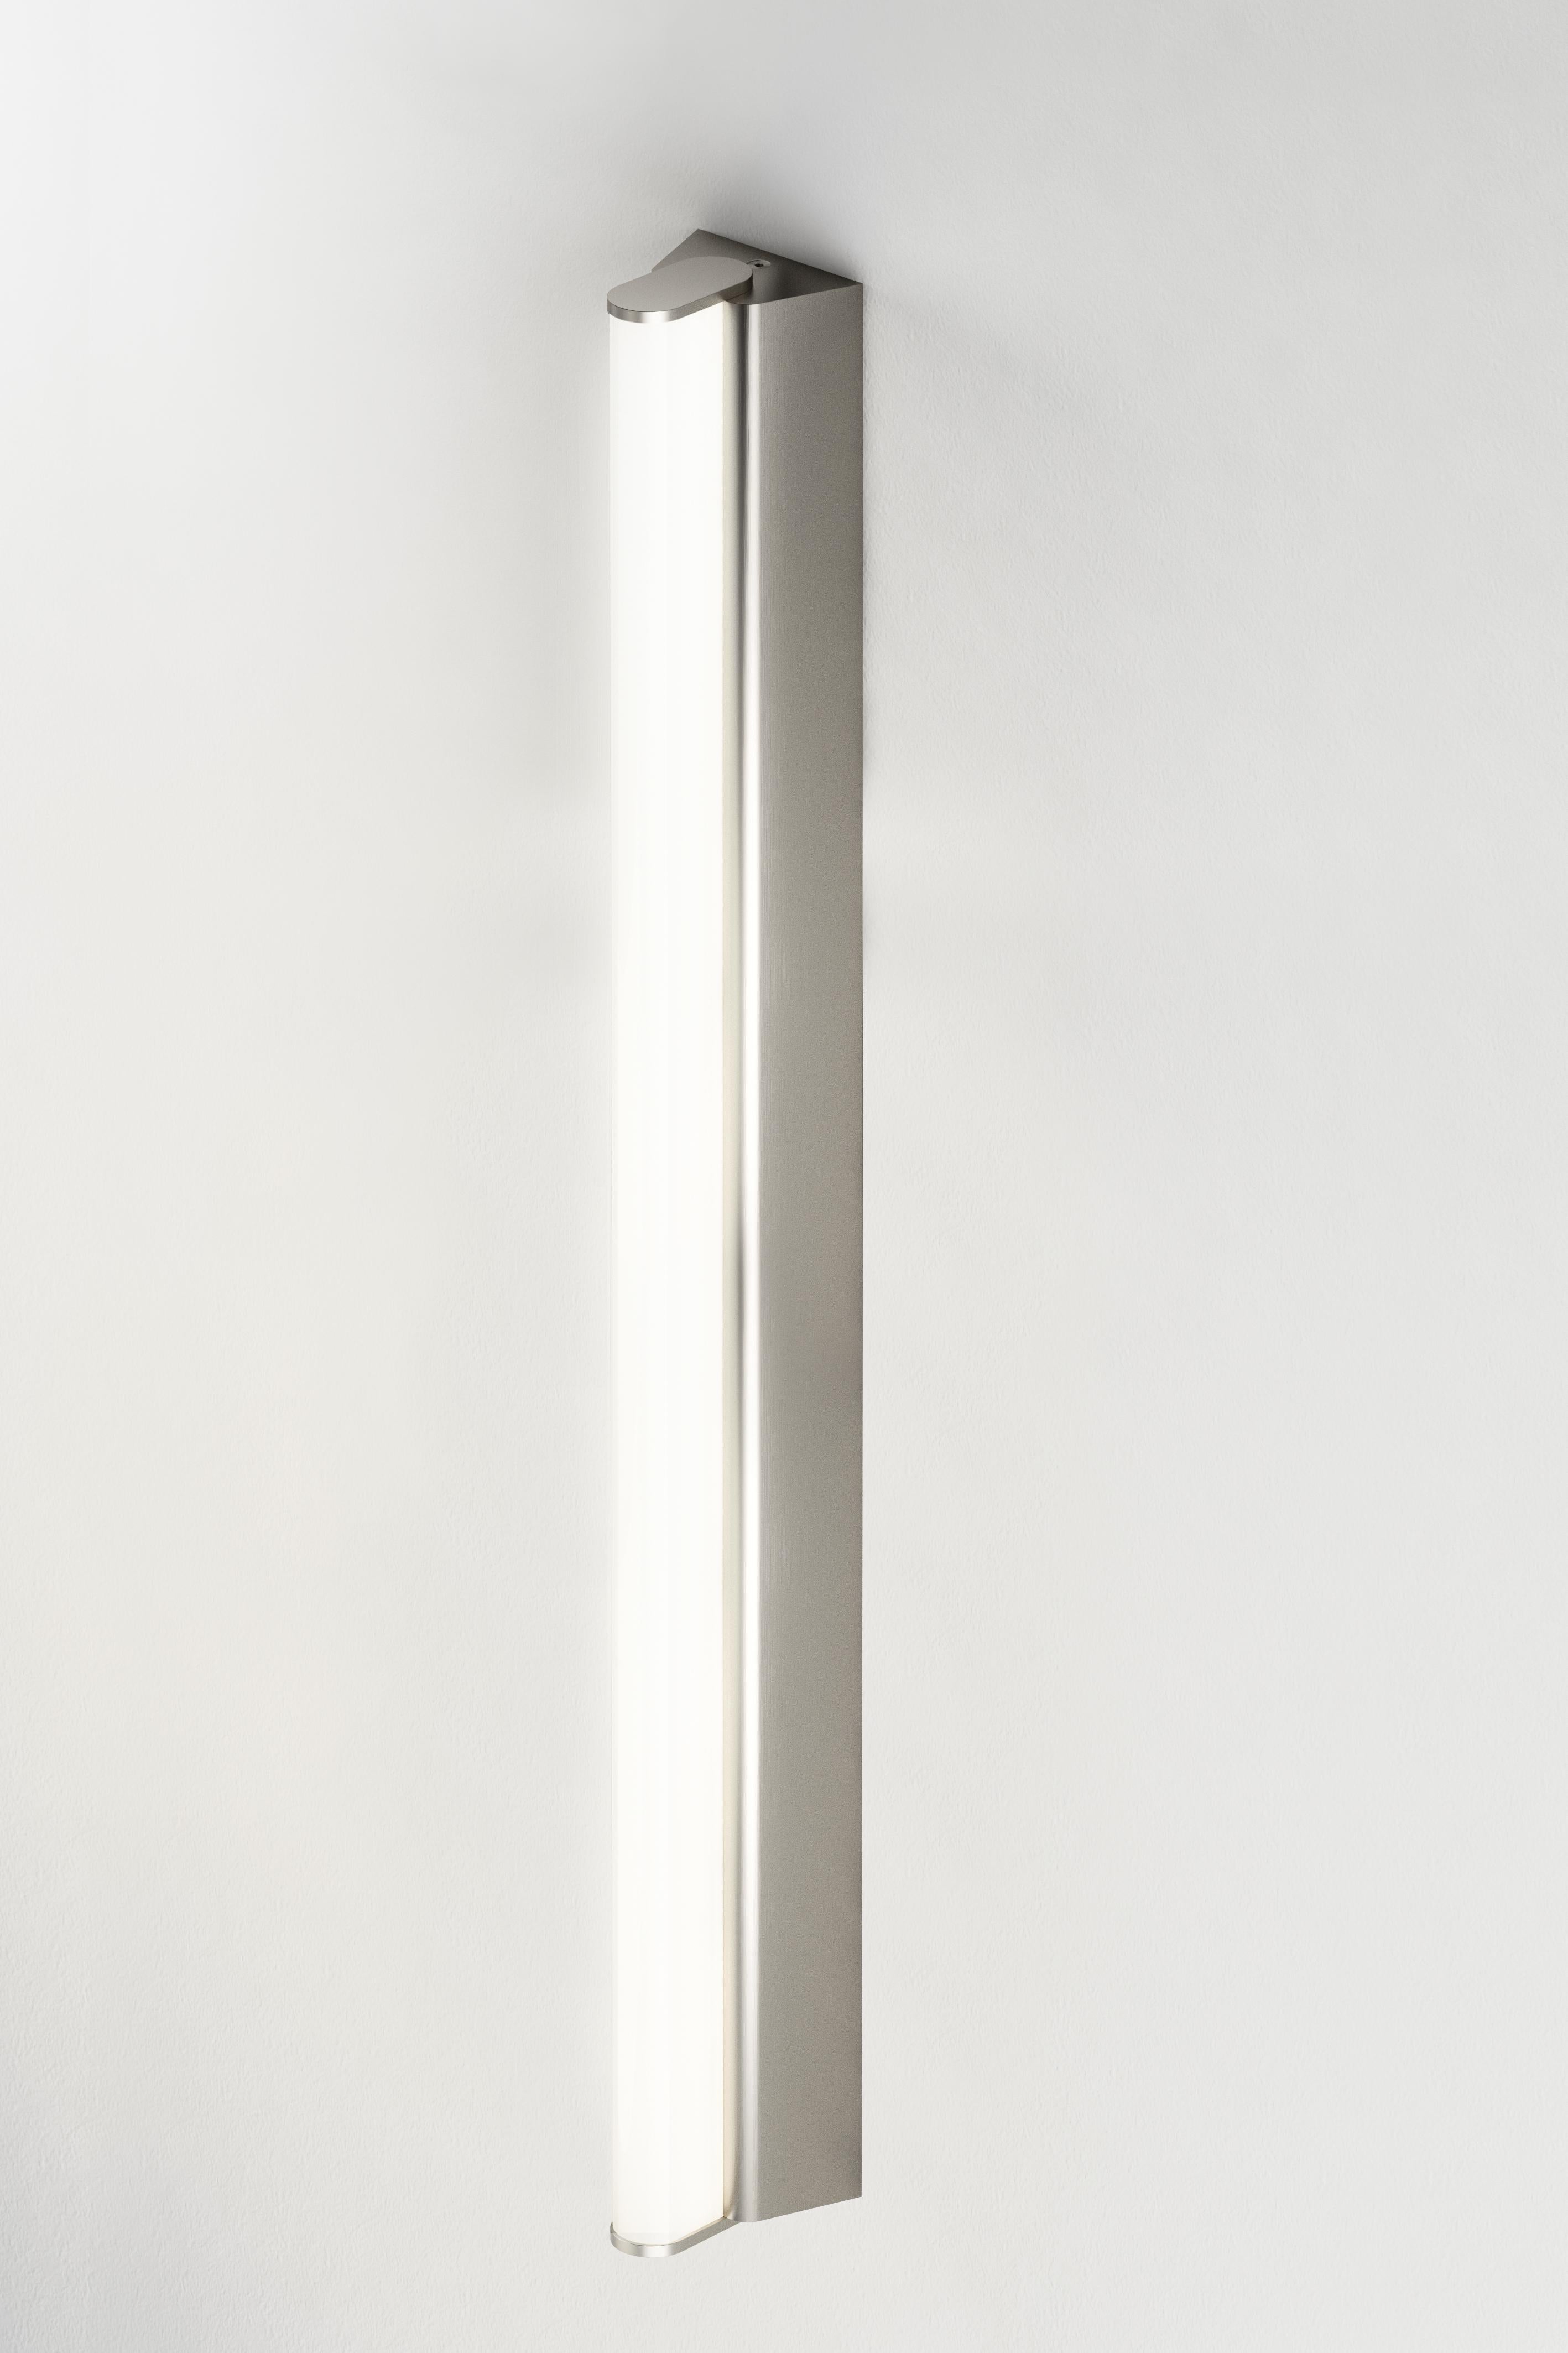 IP metrop 525 satin nickel wall light by Emilie Cathelineau
Dimensions: D52.5 x W5 X H4.5 cm
Materials: solid brass, satin nickel, LED, polycarbonate.
Others finishes and dimensions are available.

All our lamps can be wired according to each